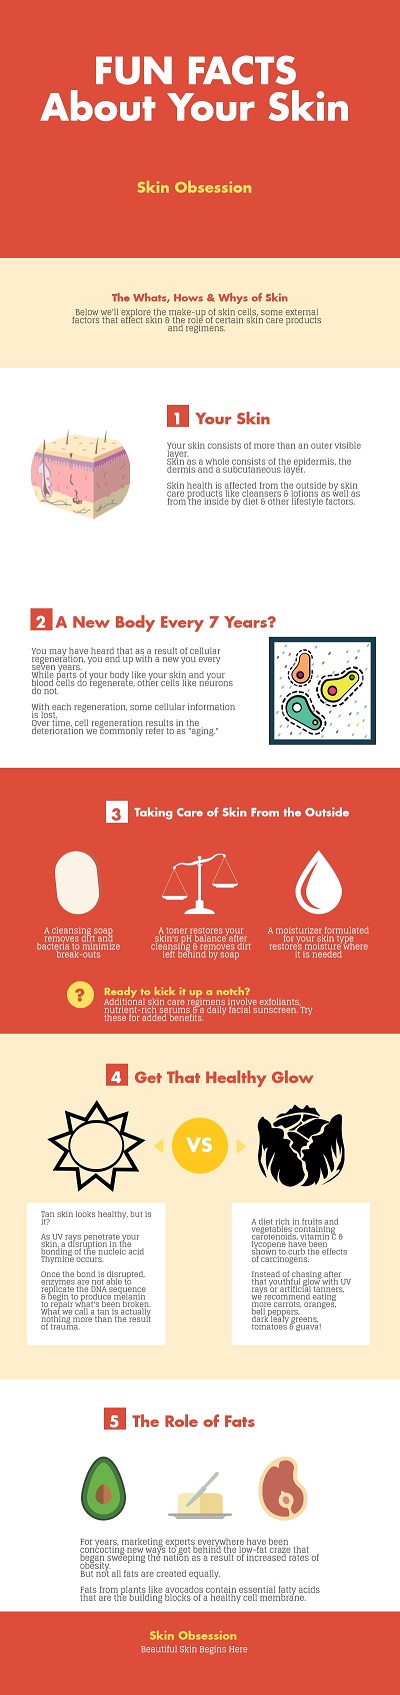 Skin Care Infographic